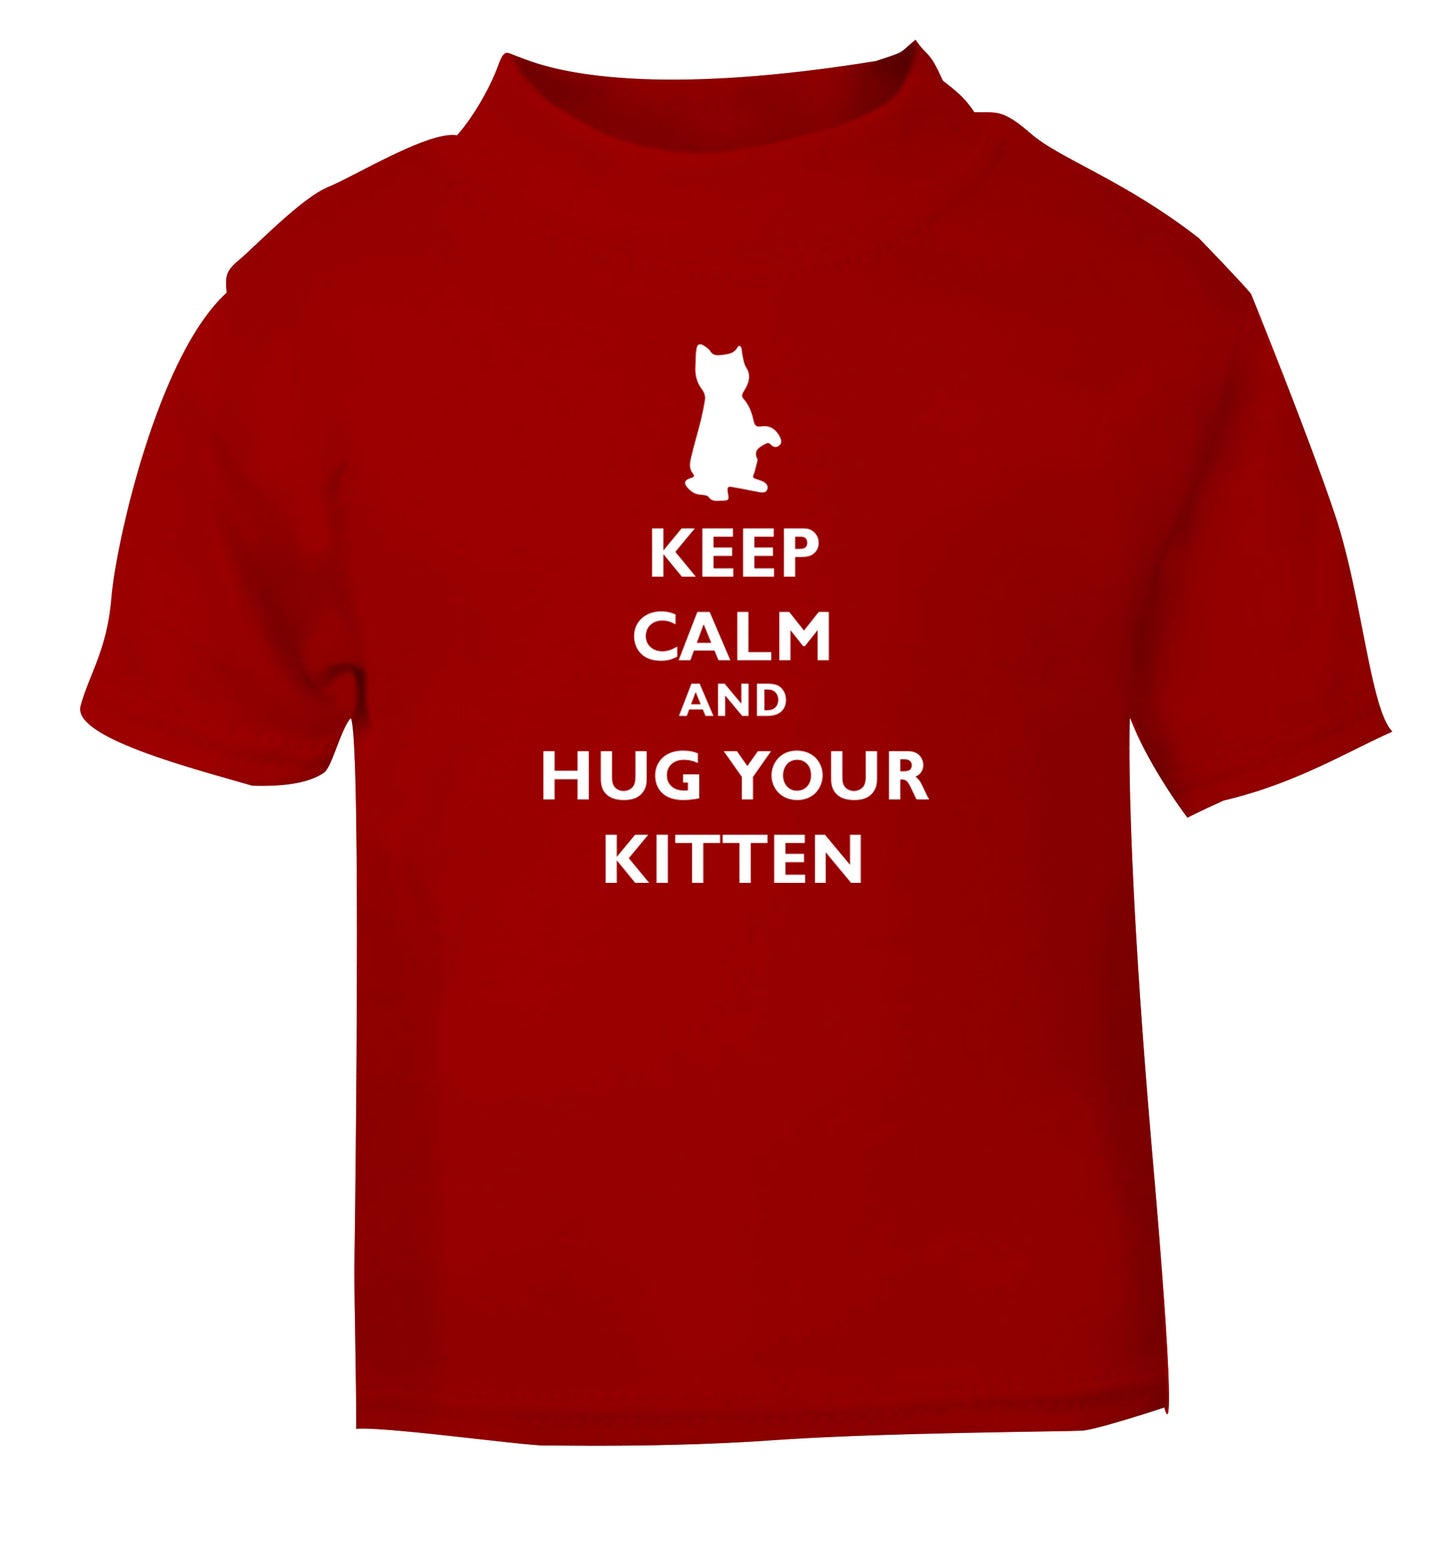 Keep calm and hug your kitten red Baby Toddler Tshirt 2 Years